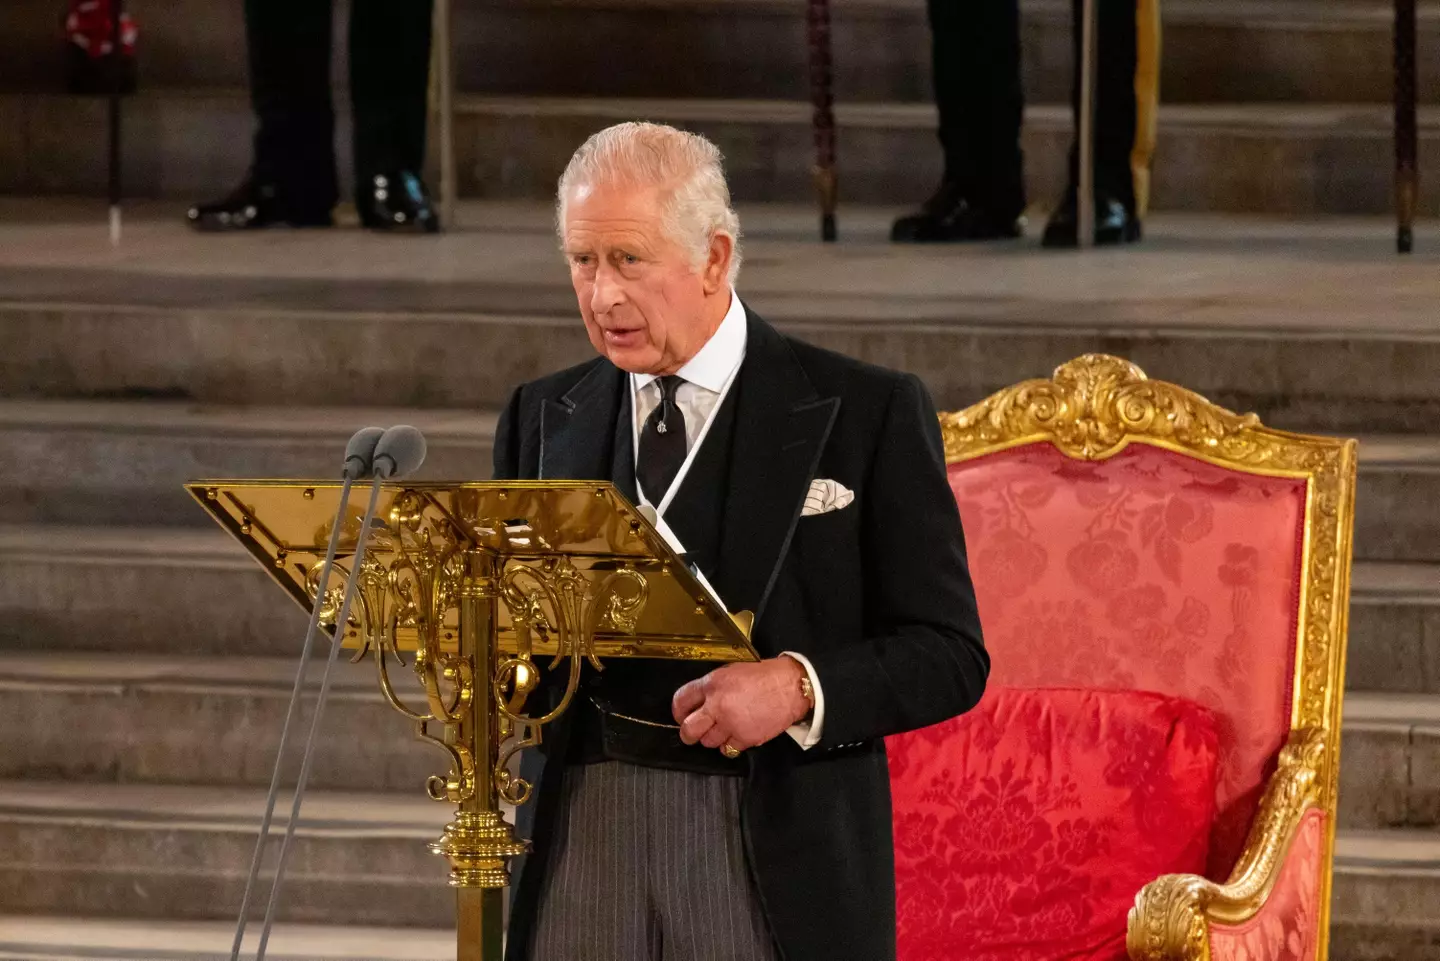 It was announced on Tuesday that King Charles III’s coronation will take place on Saturday 6 May, 2023.